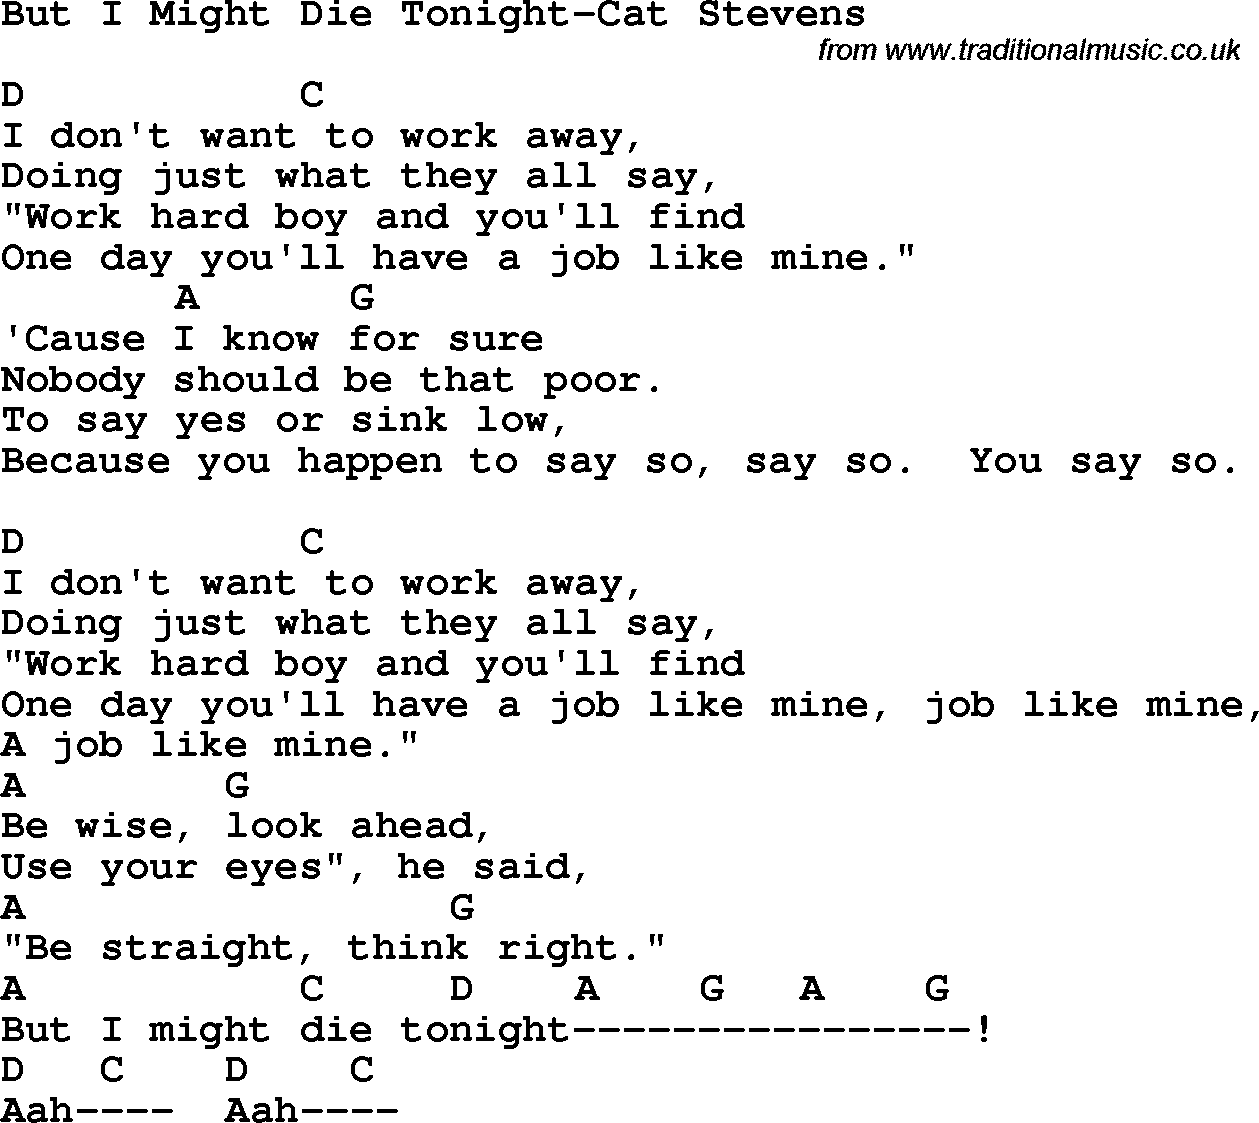 Protest Song But I Might Die Tonight-Cat Stevens lyrics and chords